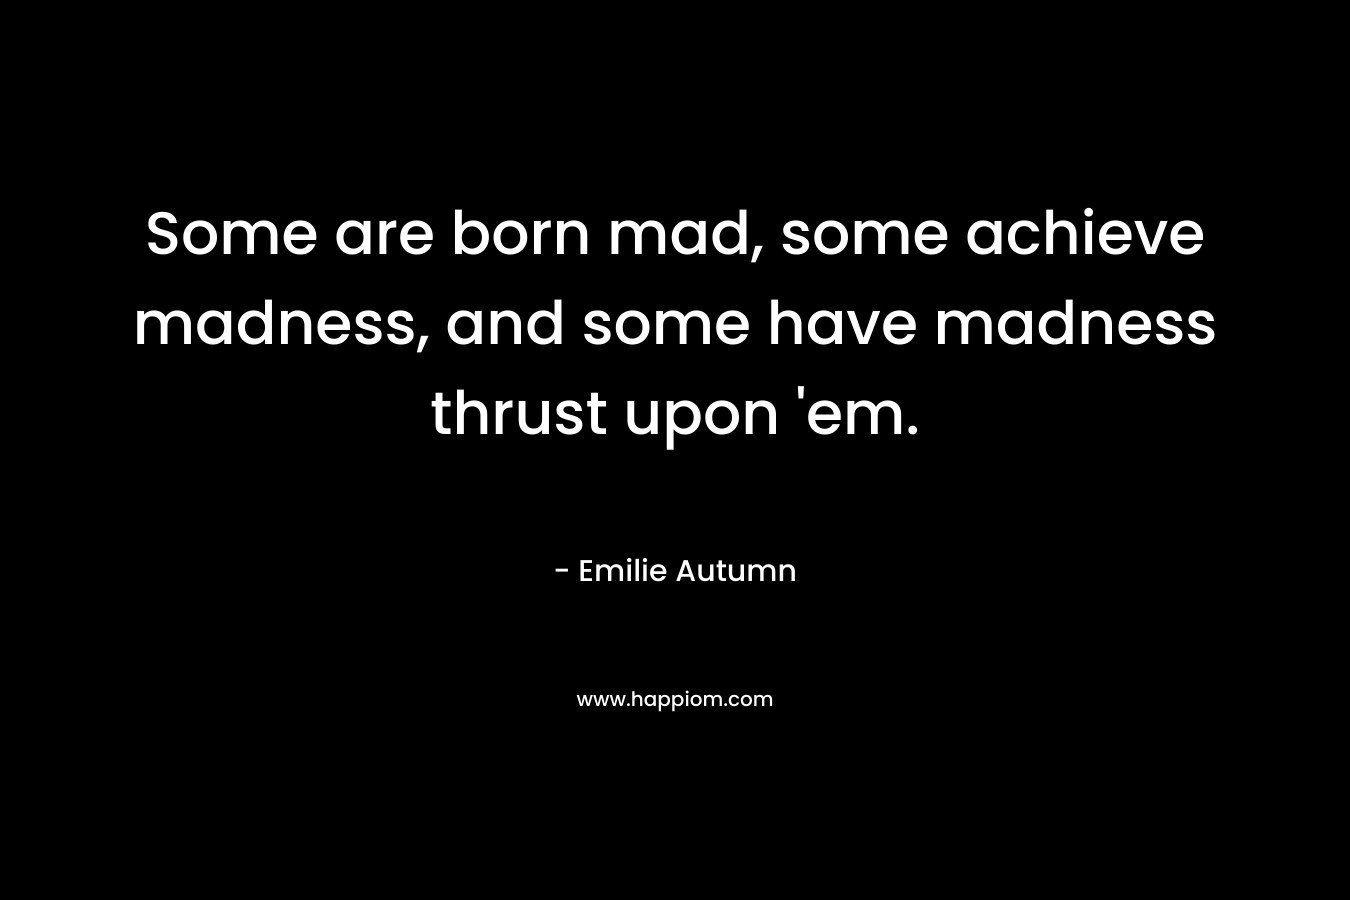 Some are born mad, some achieve madness, and some have madness thrust upon ’em. – Emilie Autumn